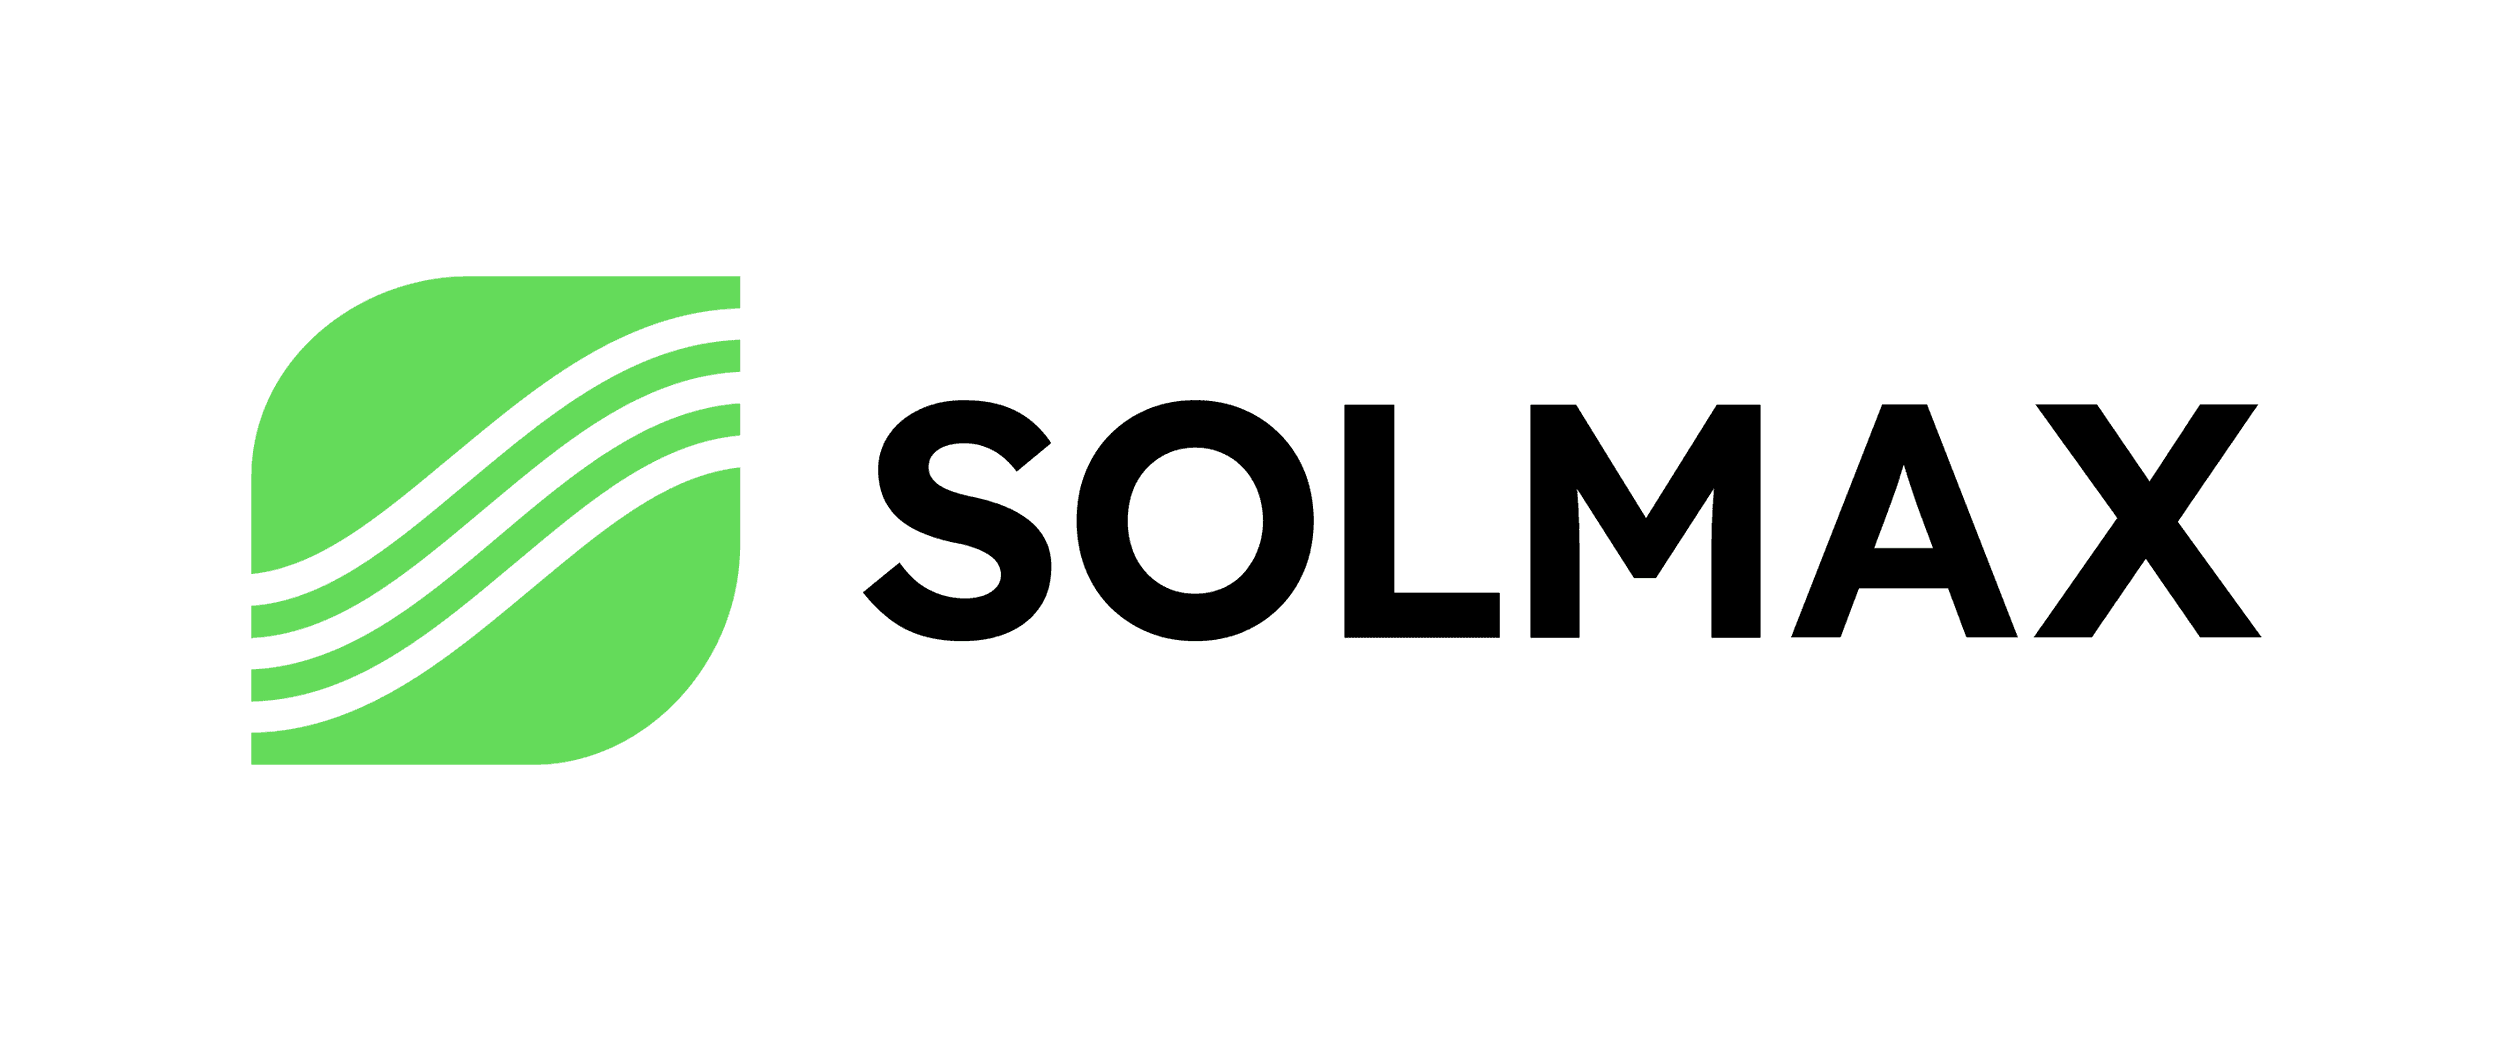 Product Products | Solmax image